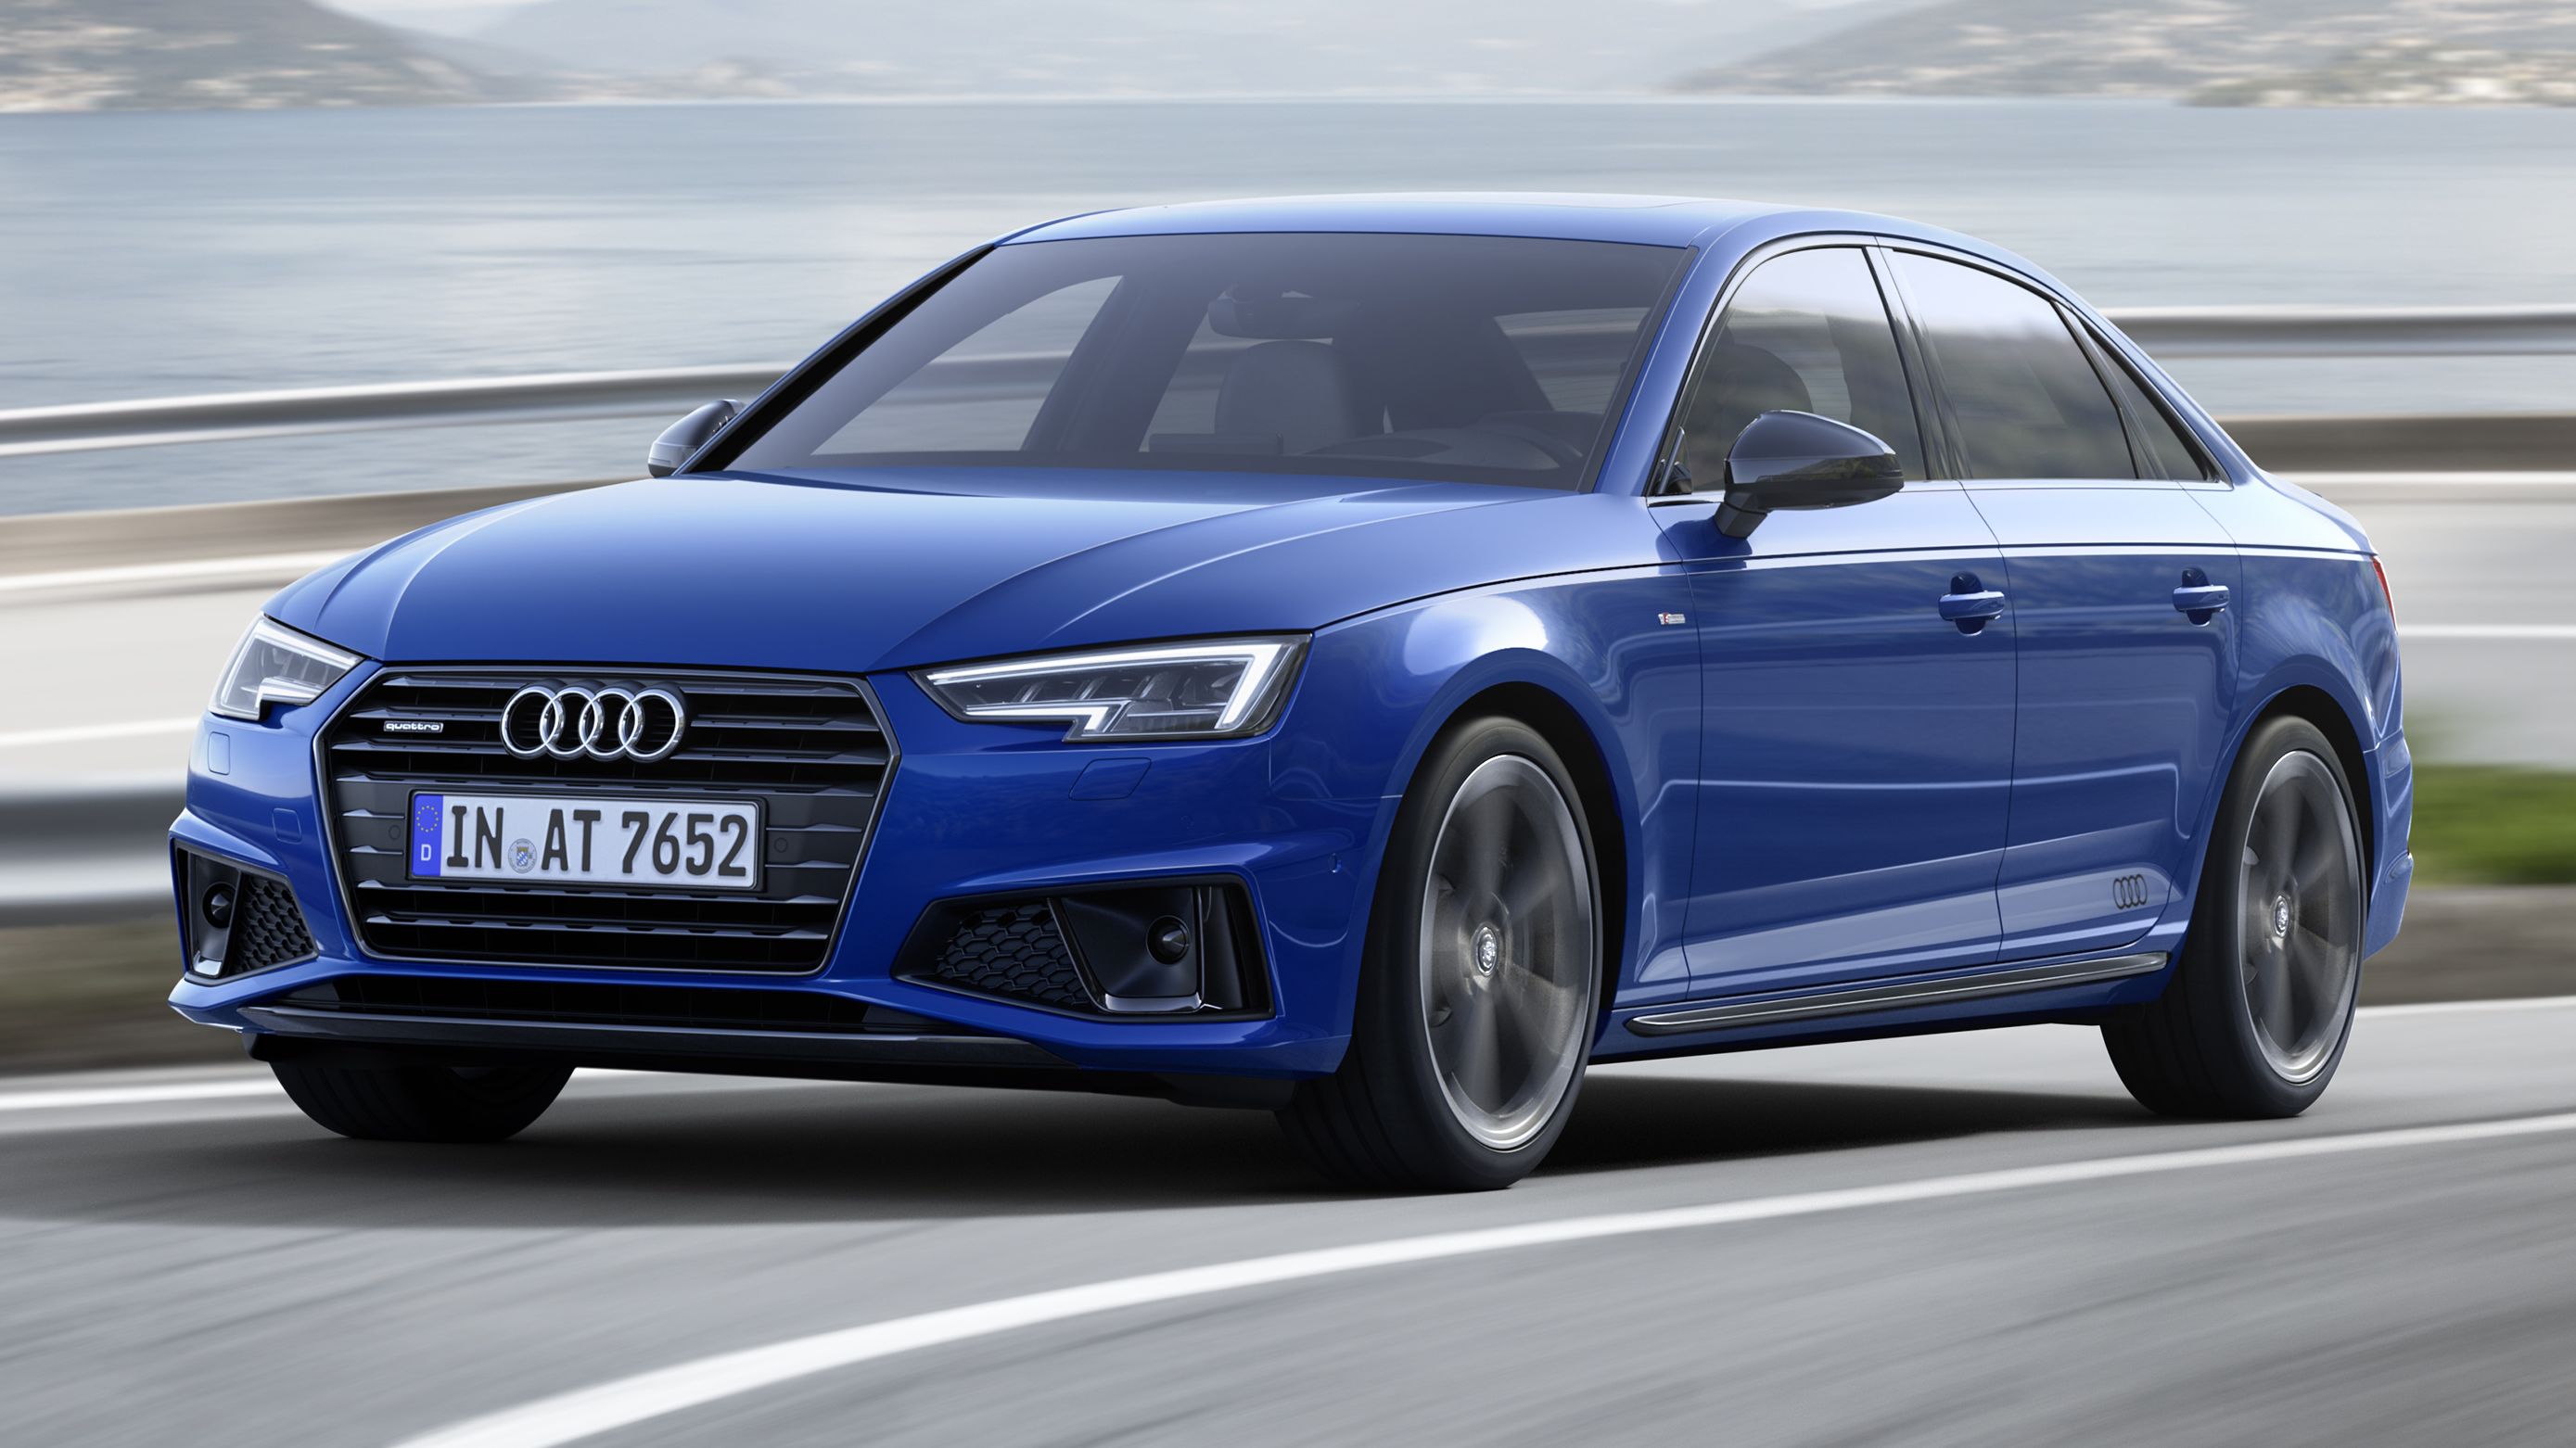 B9 Audi A4 facelift revealed minor cosmetic changes